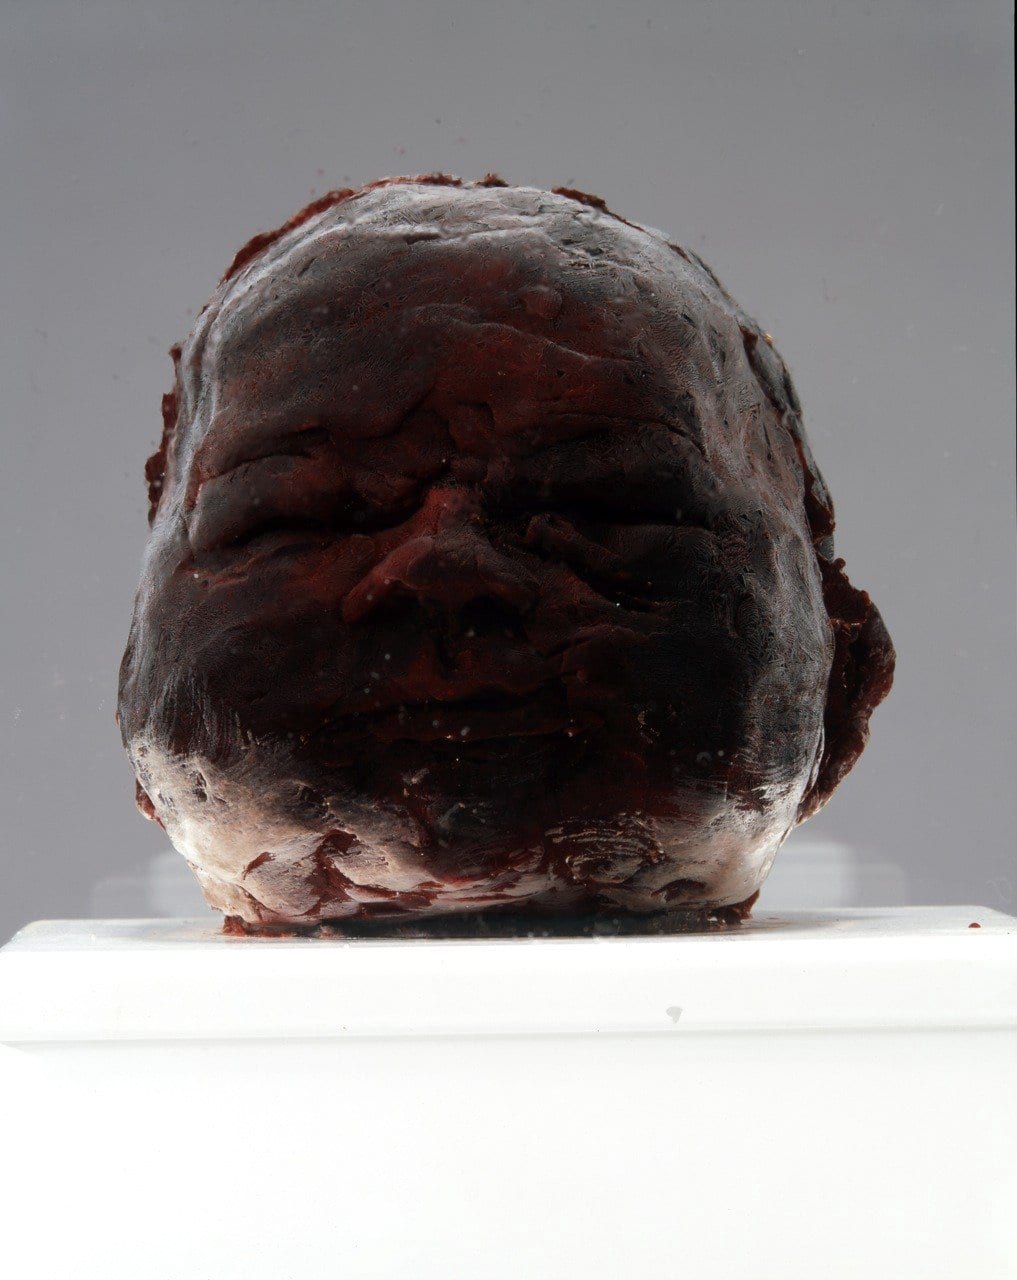 Marc Quinn. Sky. 2006. Human placenta and umbilical cord, stainless steel, Perspex, refrigeration equipment